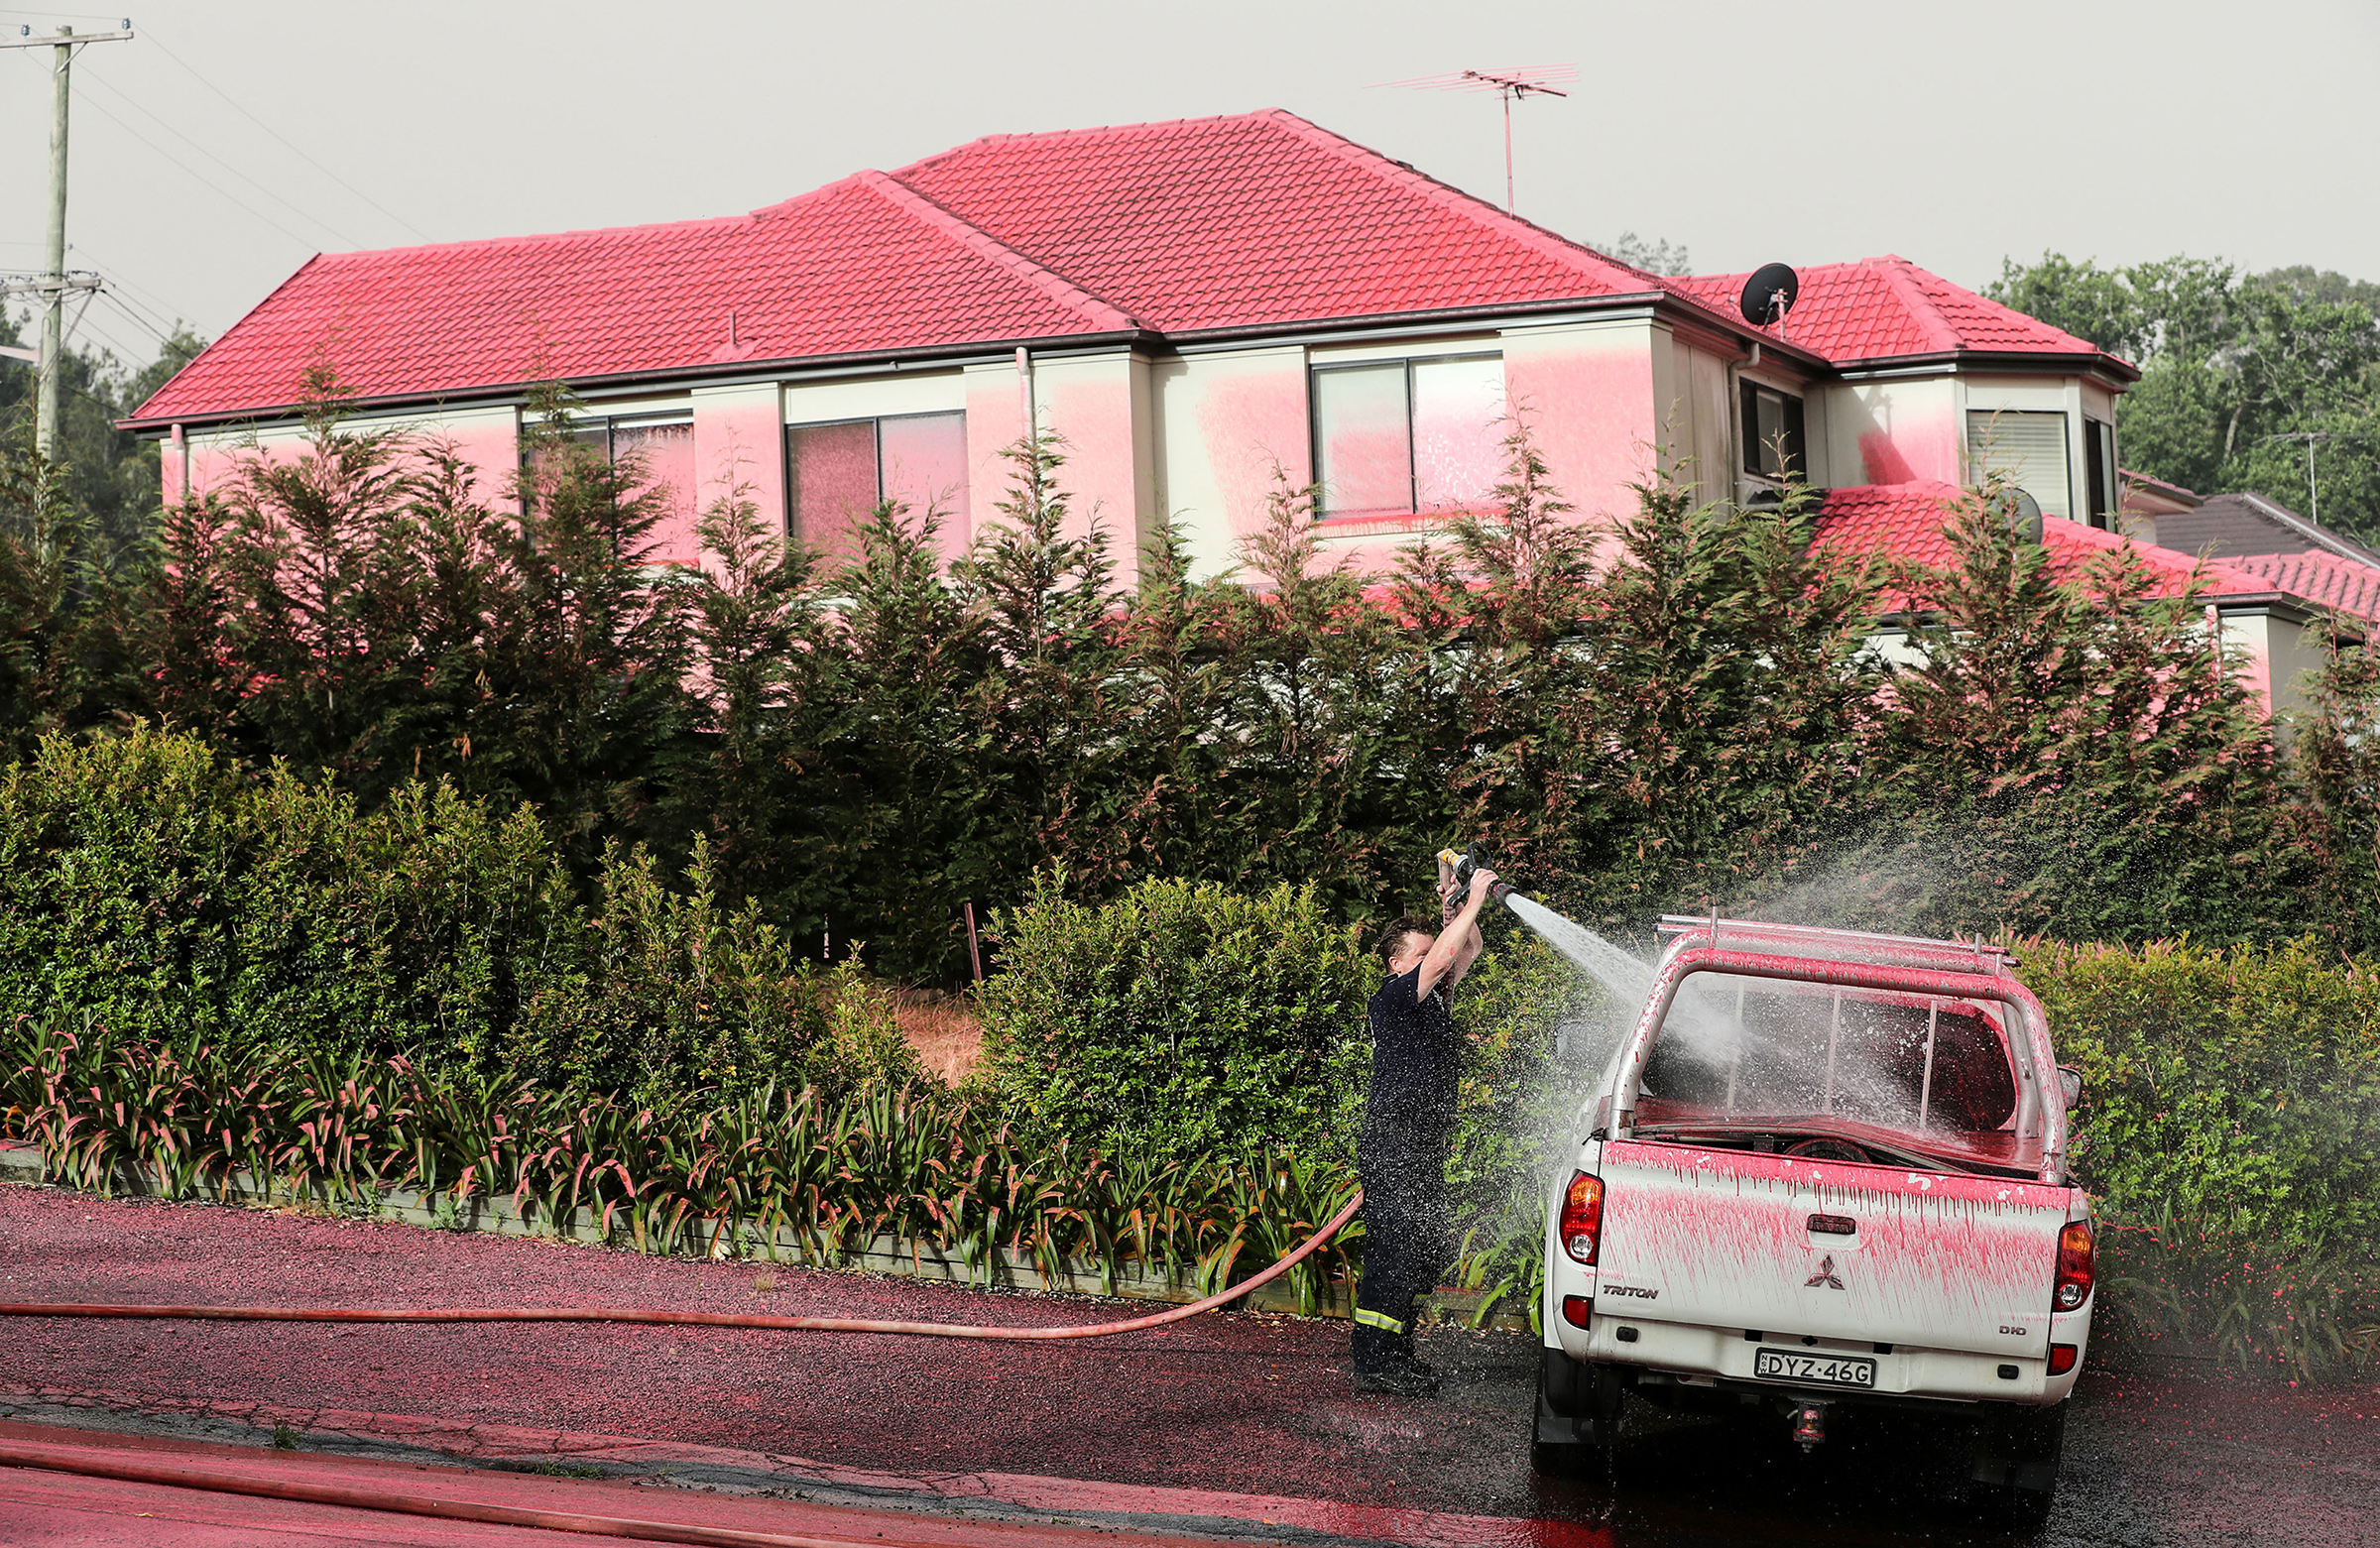 A firefighter washes a truck covered by pink fire retardant in South Turramurra, New South Wales, on Nov. 12, 2019. (Bai Xuefei—Xinhua/eyevine/Redux)